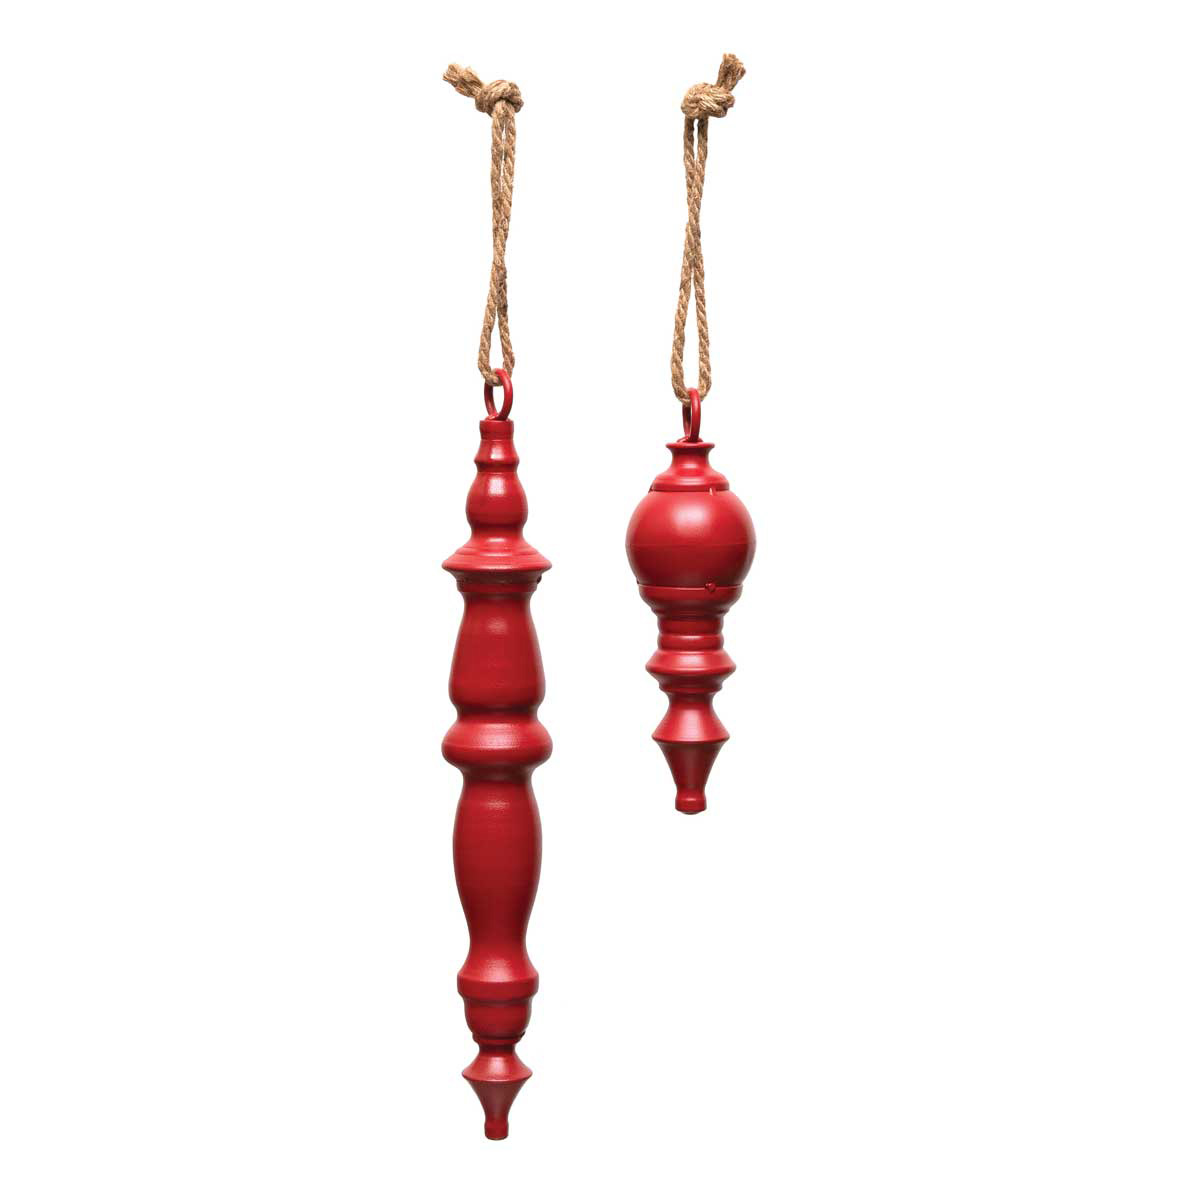 ORNAMENT FINIAL MATTE RED LARGE 2.5IN X 16IN METAL